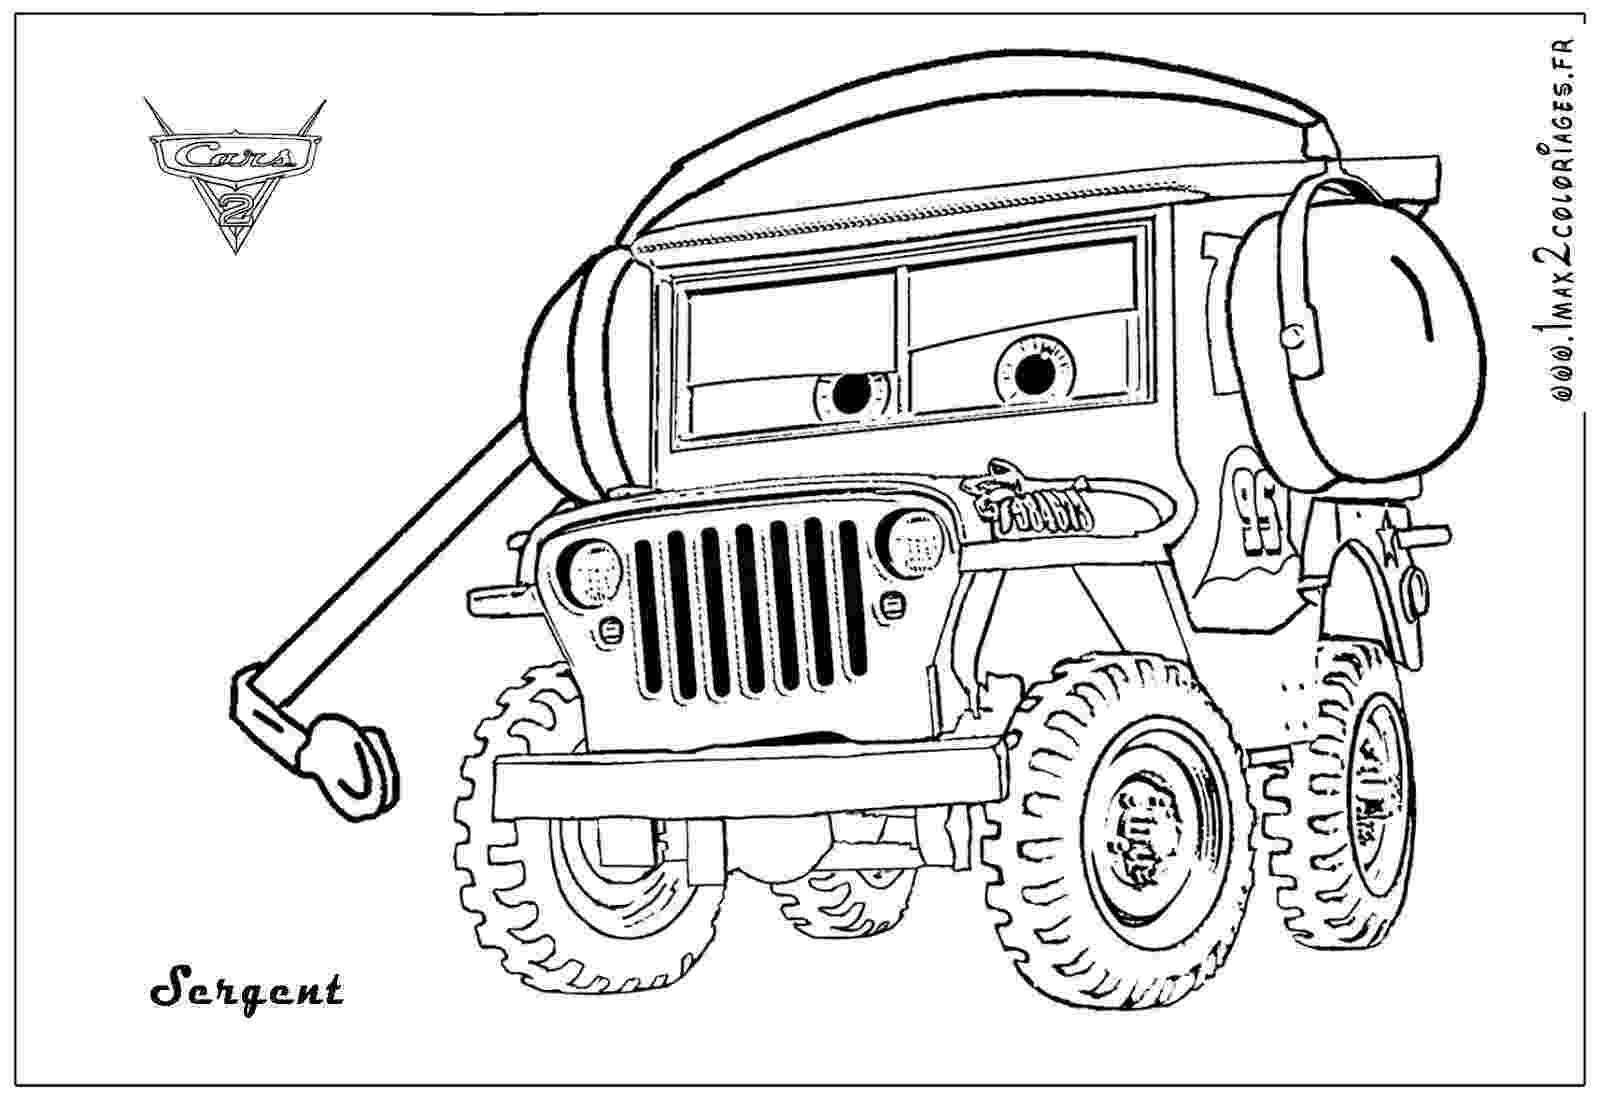 cars movie colouring pages top 10 disney cars 3 coloring pages pages cars colouring movie 